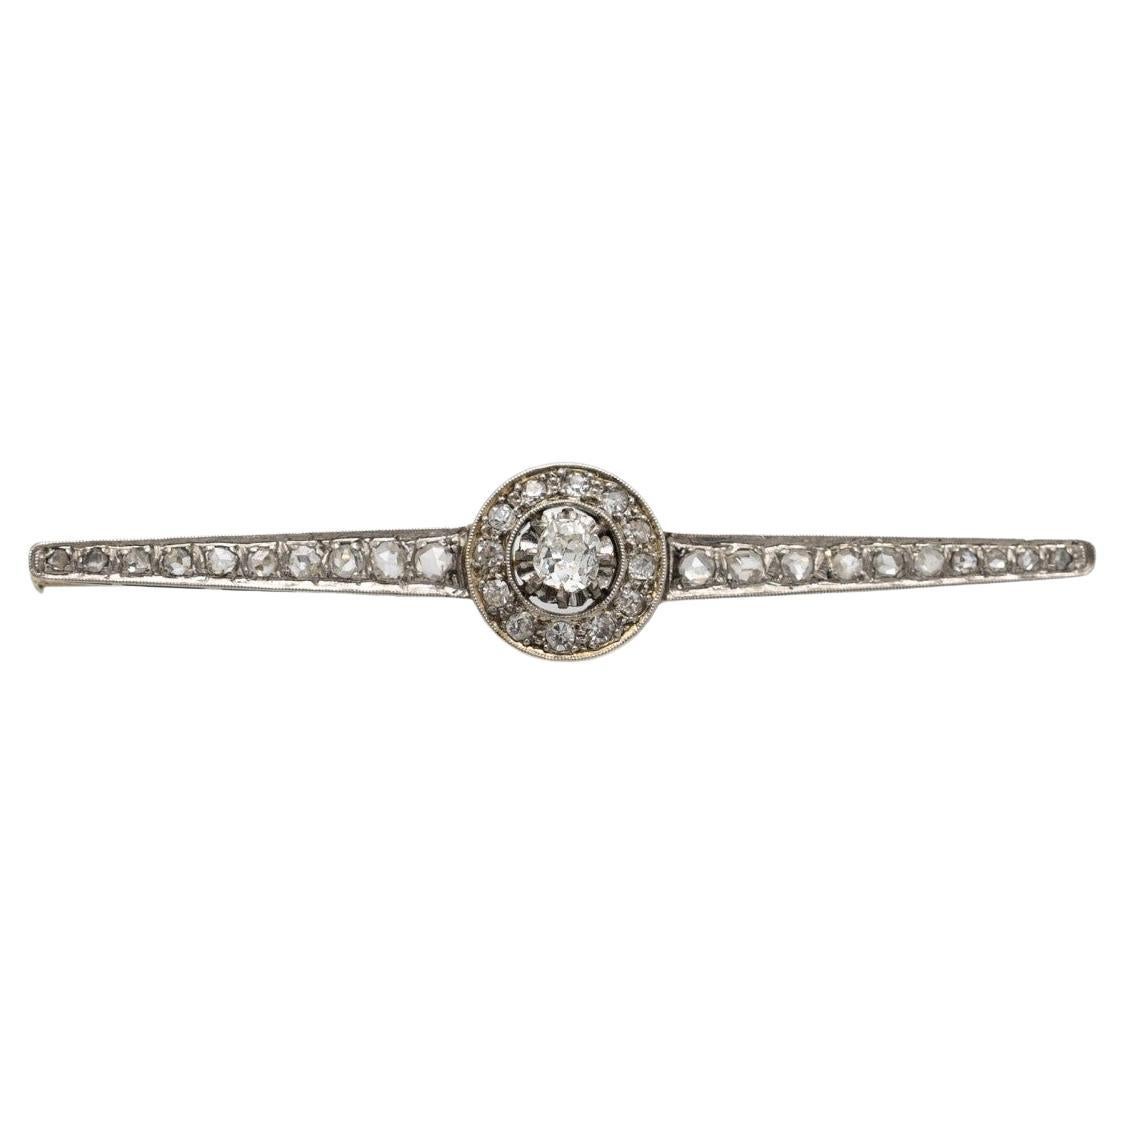 Old Art Deco gold brooch with diamonds, circa 1940s. For Sale